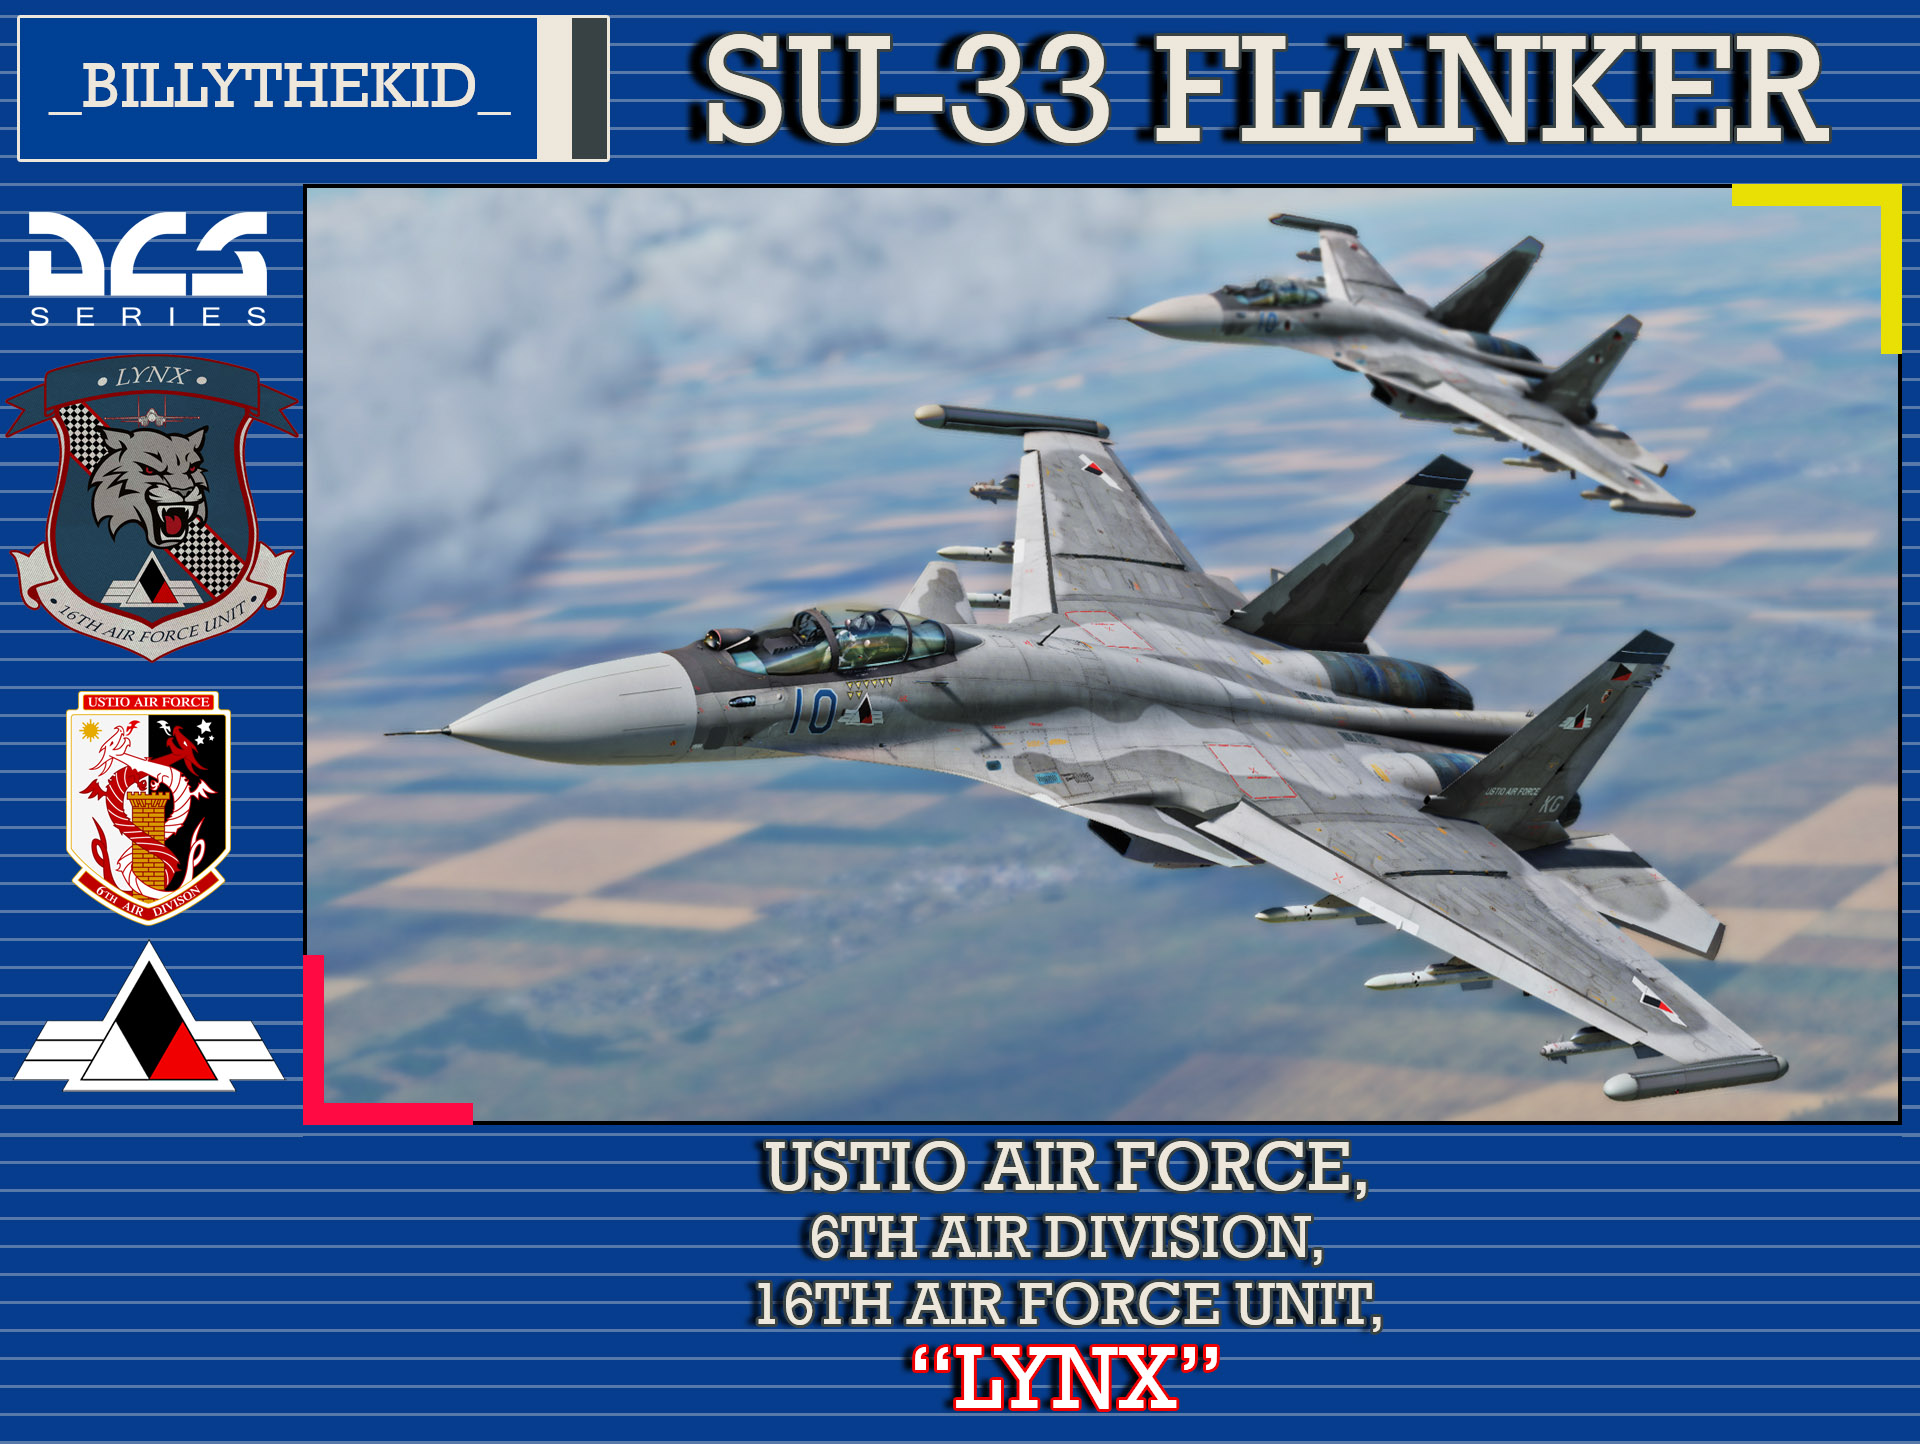 Ace Combat - Ustio Air Force 6th Air Division, 16th Air Force Unit "Lynx" SU-33 Flanker